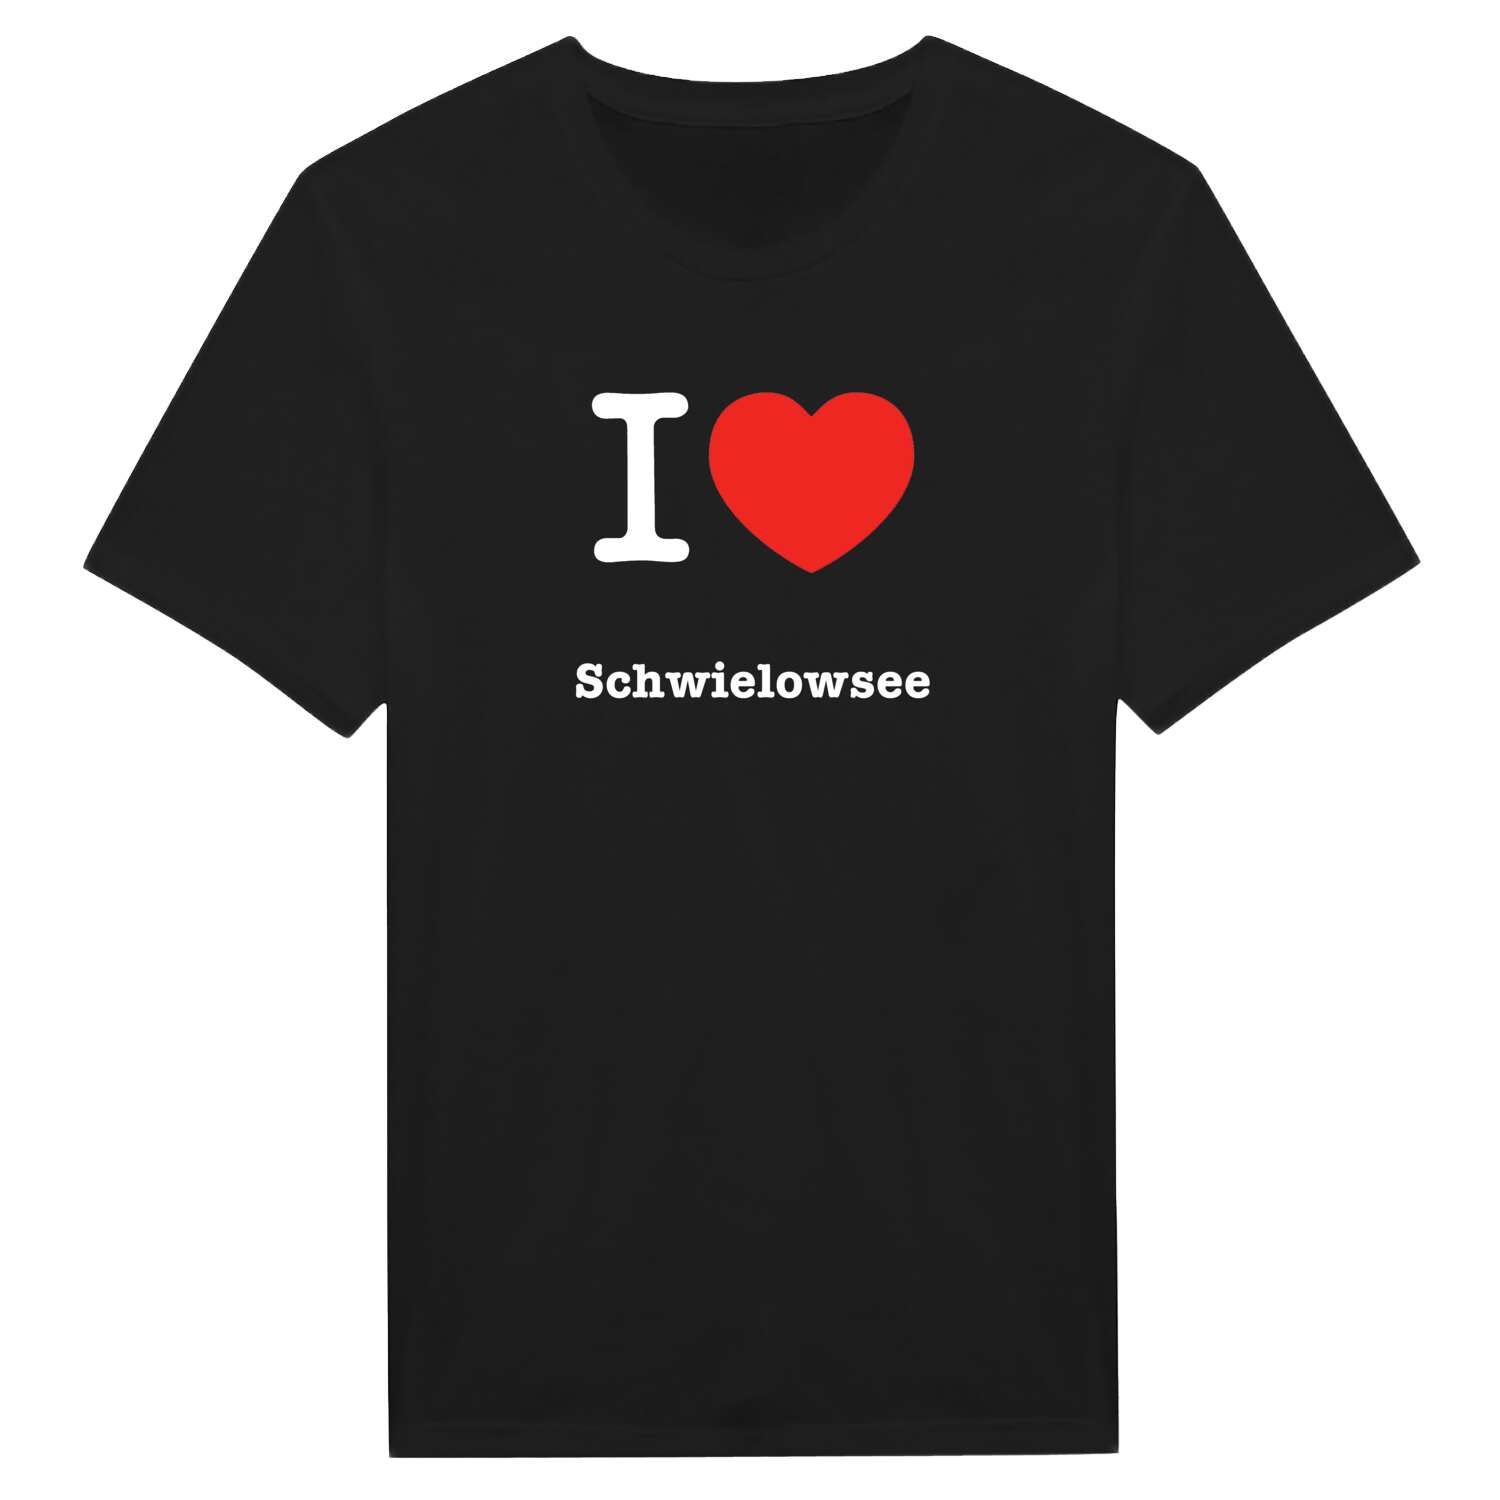 Schwielowsee T-Shirt »I love«